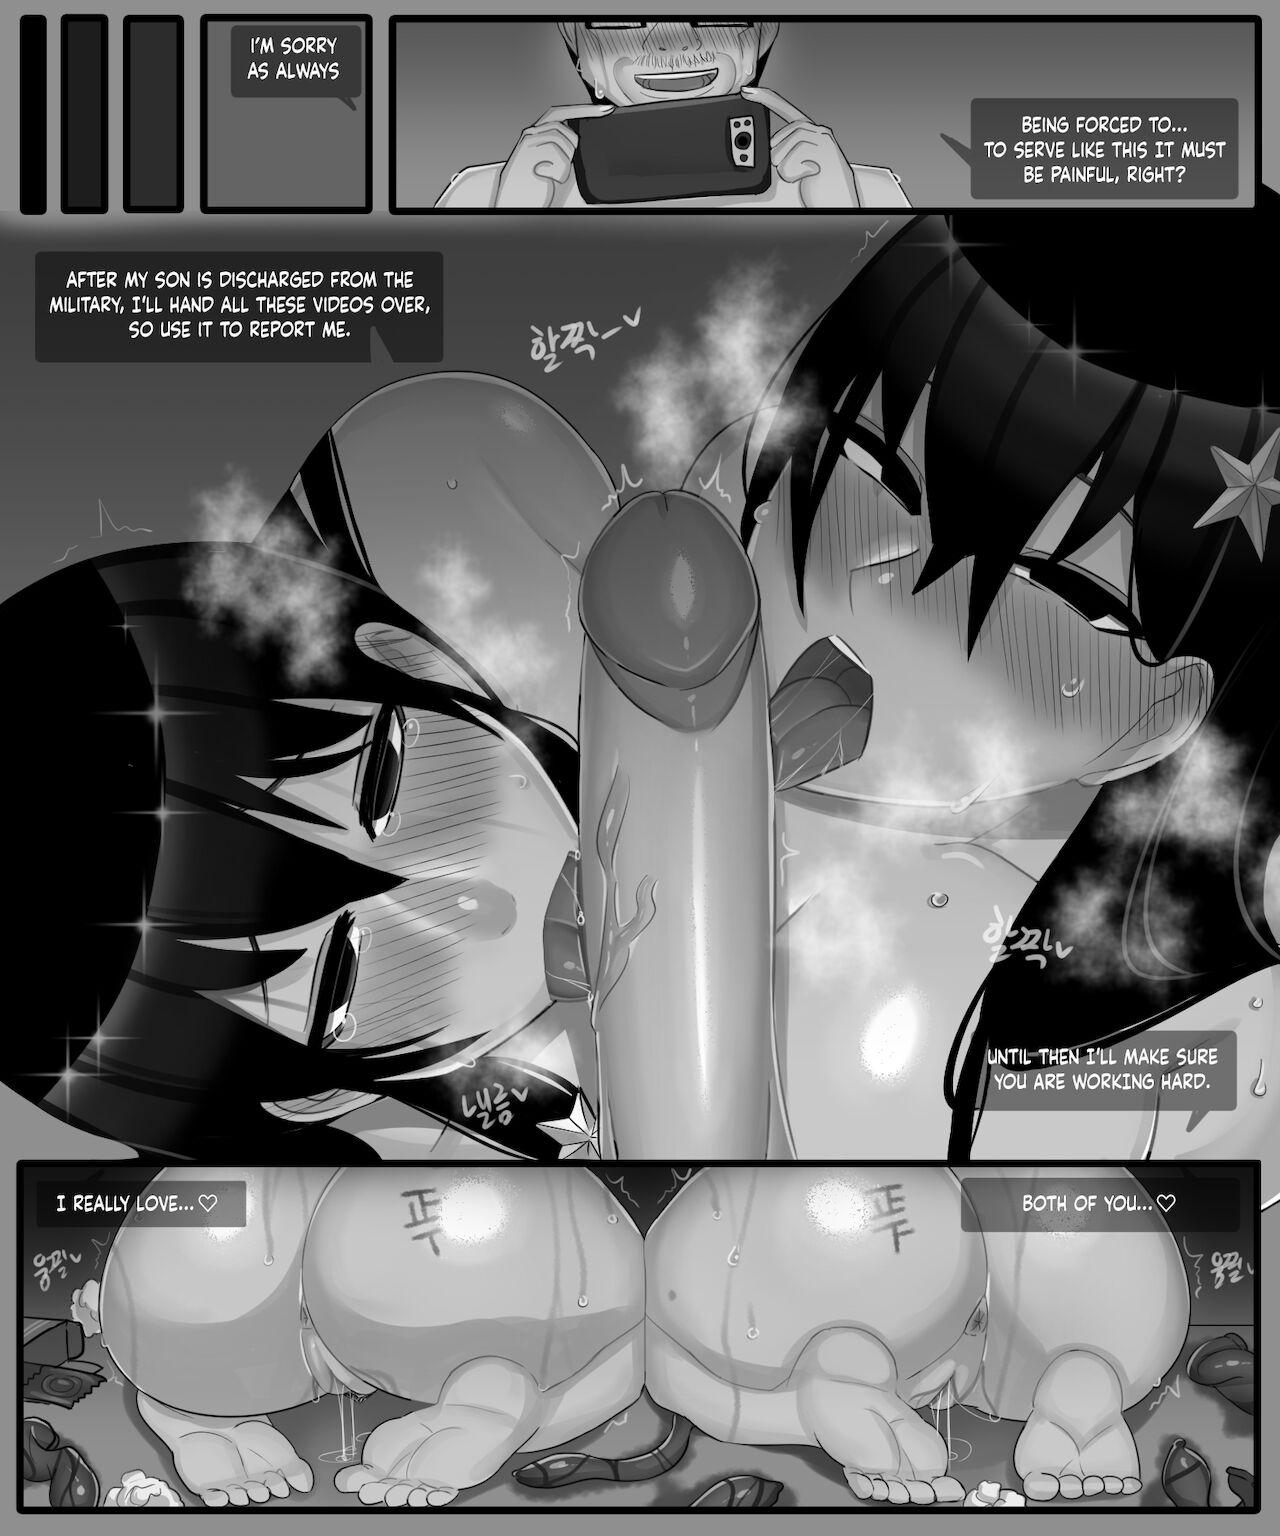 Cams The story of a childhood friend becoming father's lover 1 - Original Brother - Page 25